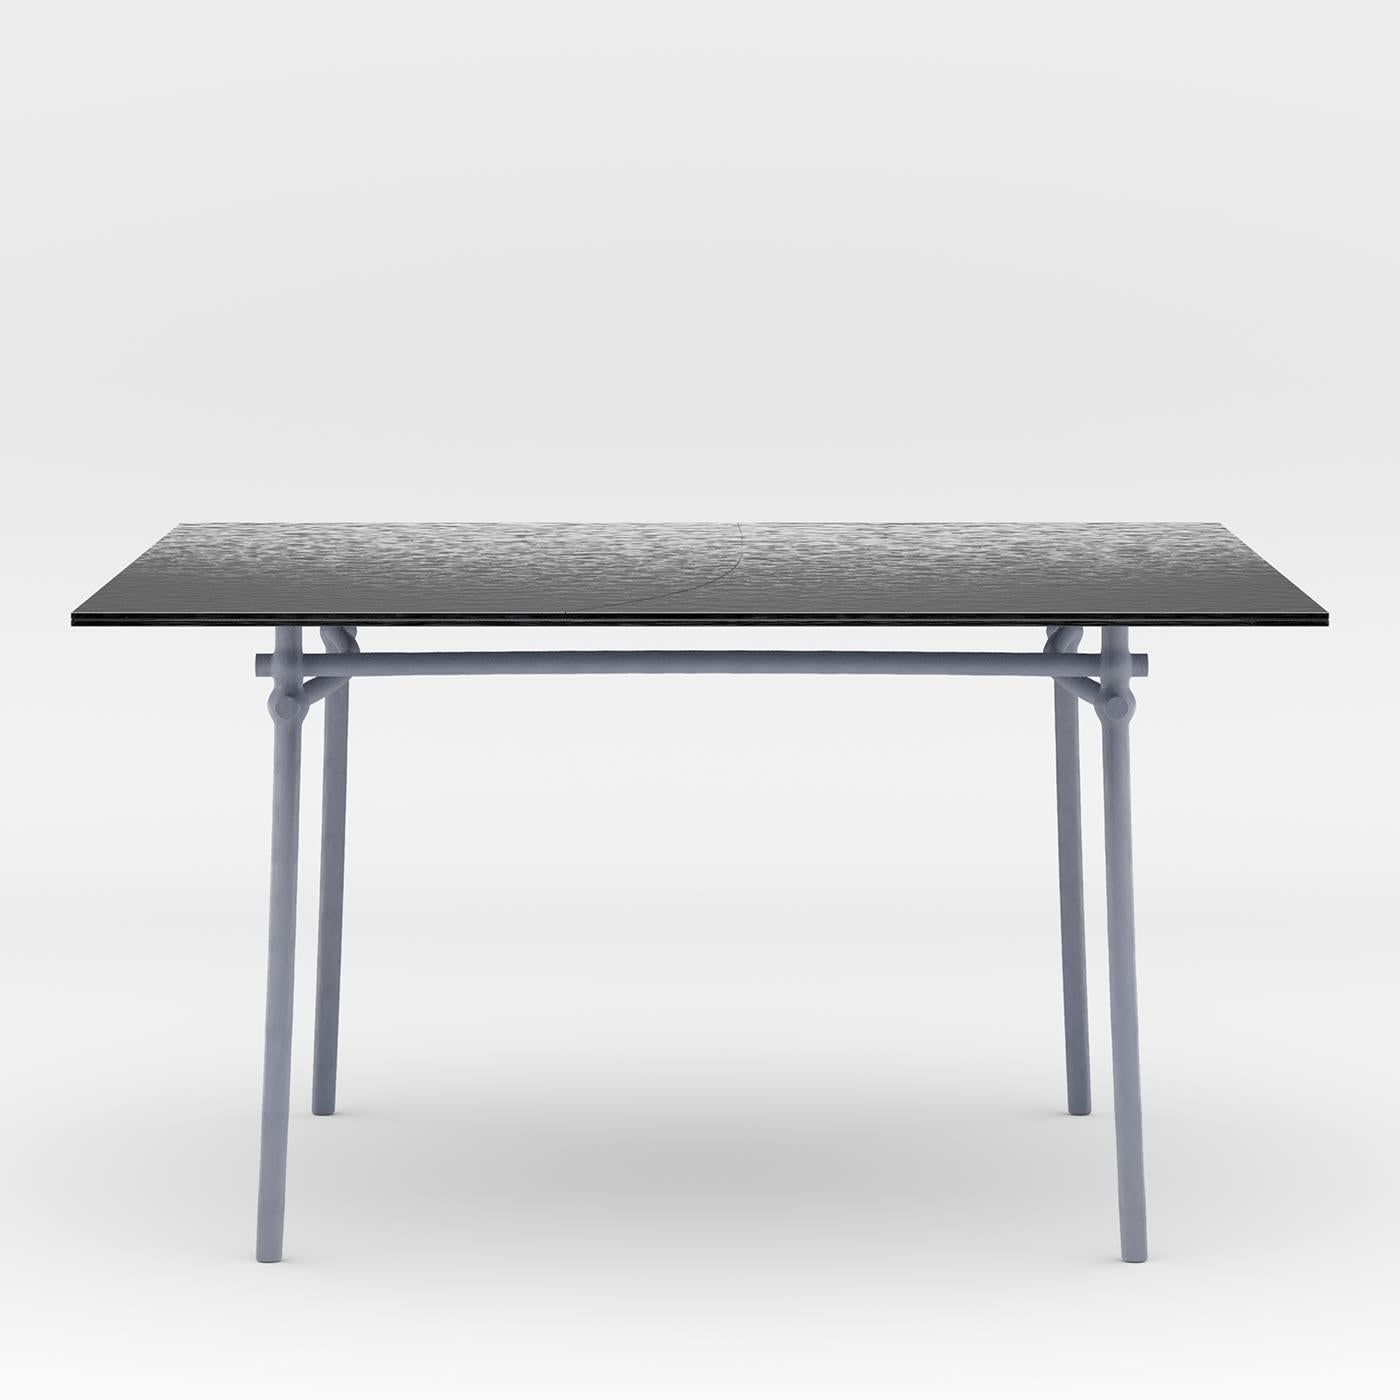 Imbued with timeless sophistication, this square dining table will exude an elegant, industrial-chic flair. Designed in collaboration with Zanellato/Bortotto, it is handcrafted of lacquered and zinc-coated metal, with a top in natural lava stone.